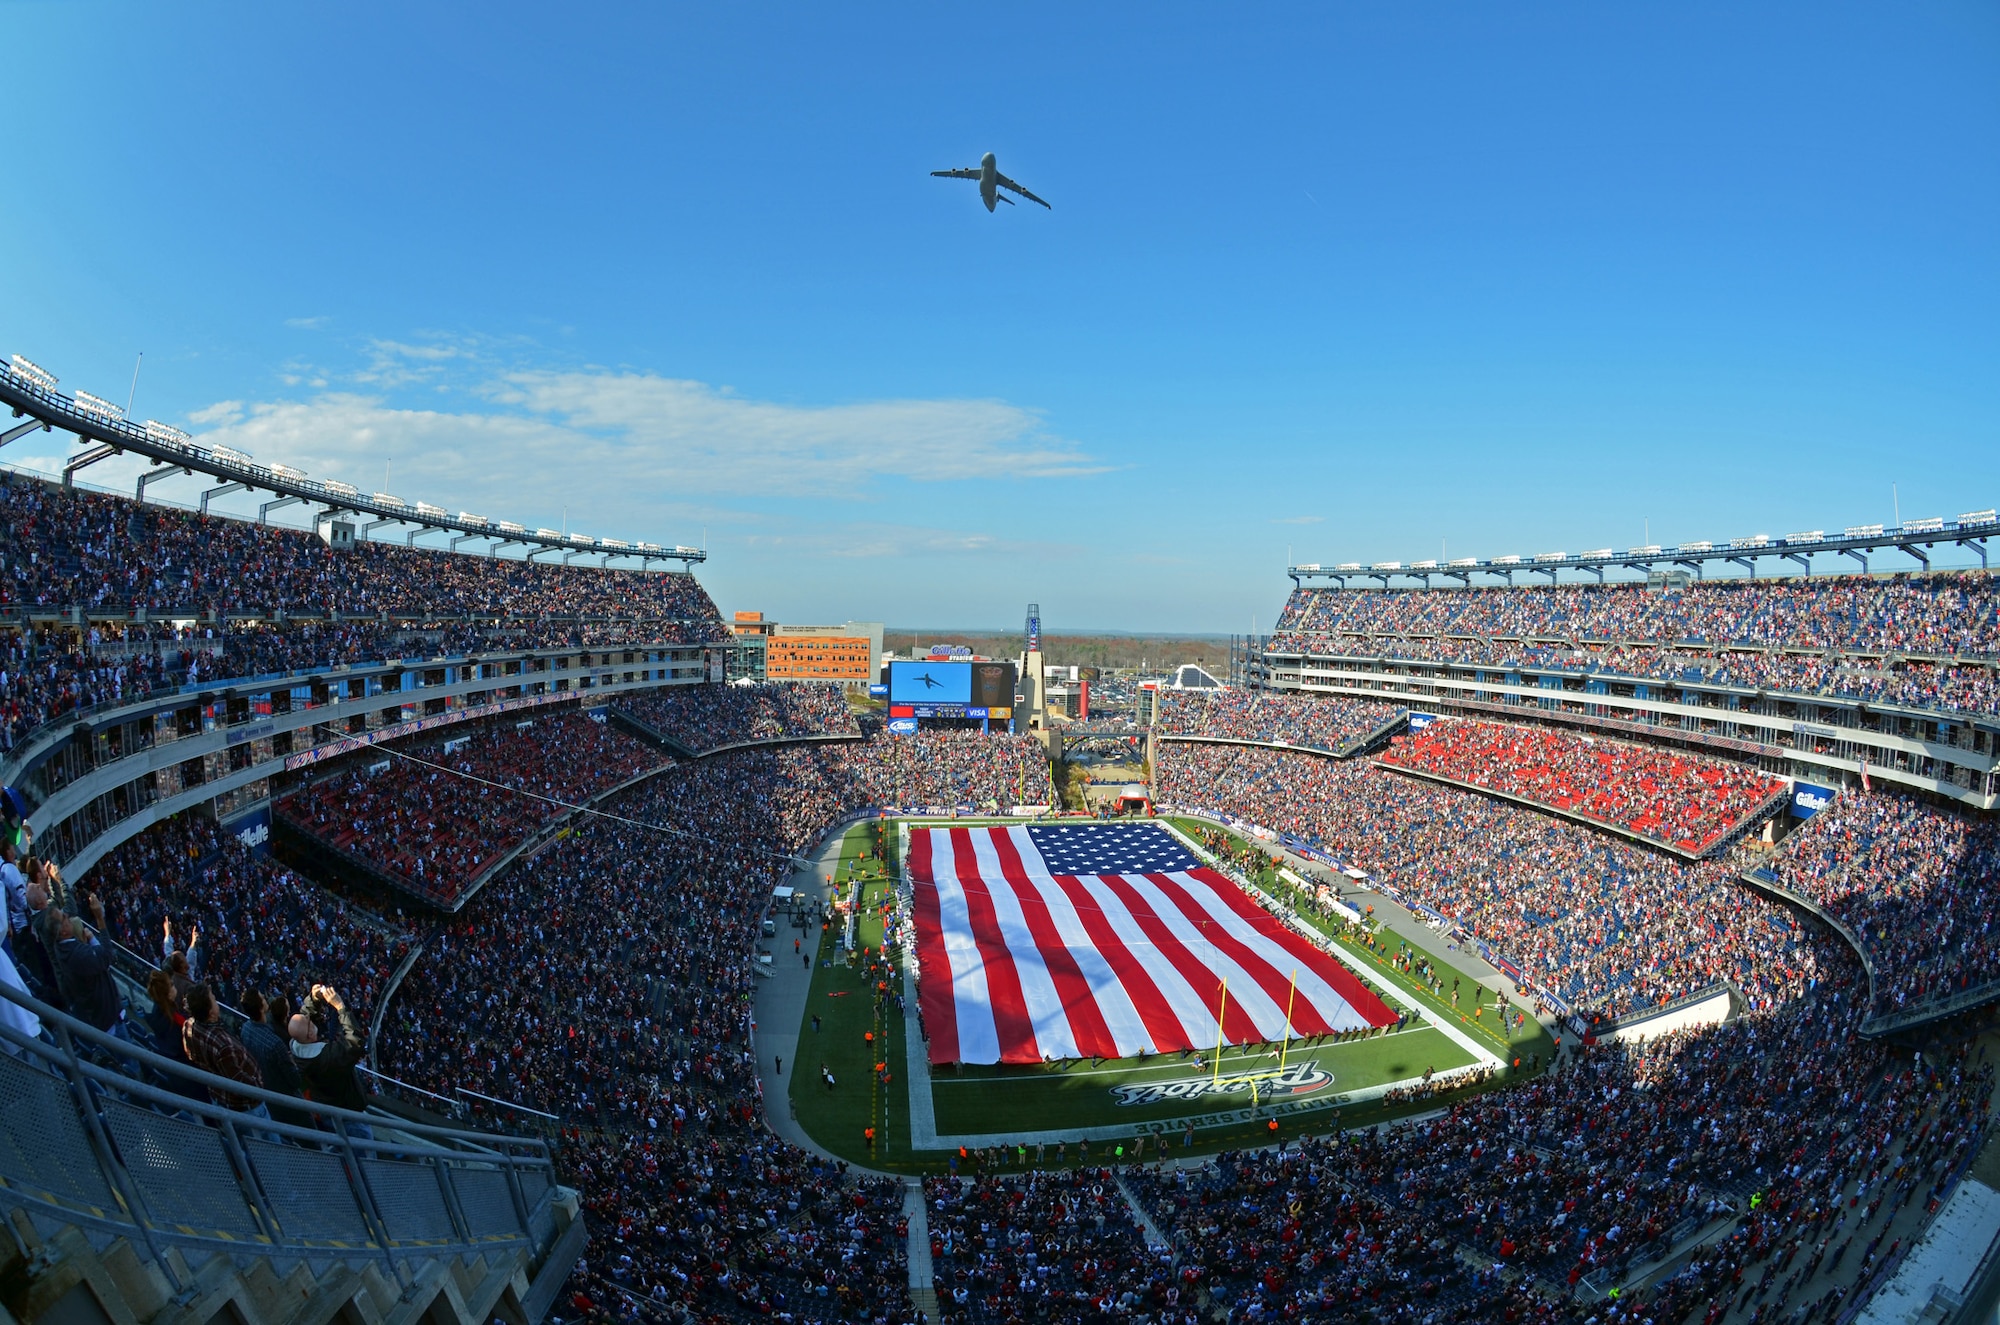 A C-5 Galaxy flies over Gillette Stadium, Foxboro, Mass., Nov. 11, 2012. The fly over was prior to the Patriots kick off with an estimated crowd of more than 68,000. The aircraft is from the "the Patriot Wing" at Westover Air Reserve Base, Mass. (U.S. Air Force photo/Senior Airman Kelly Galloway)